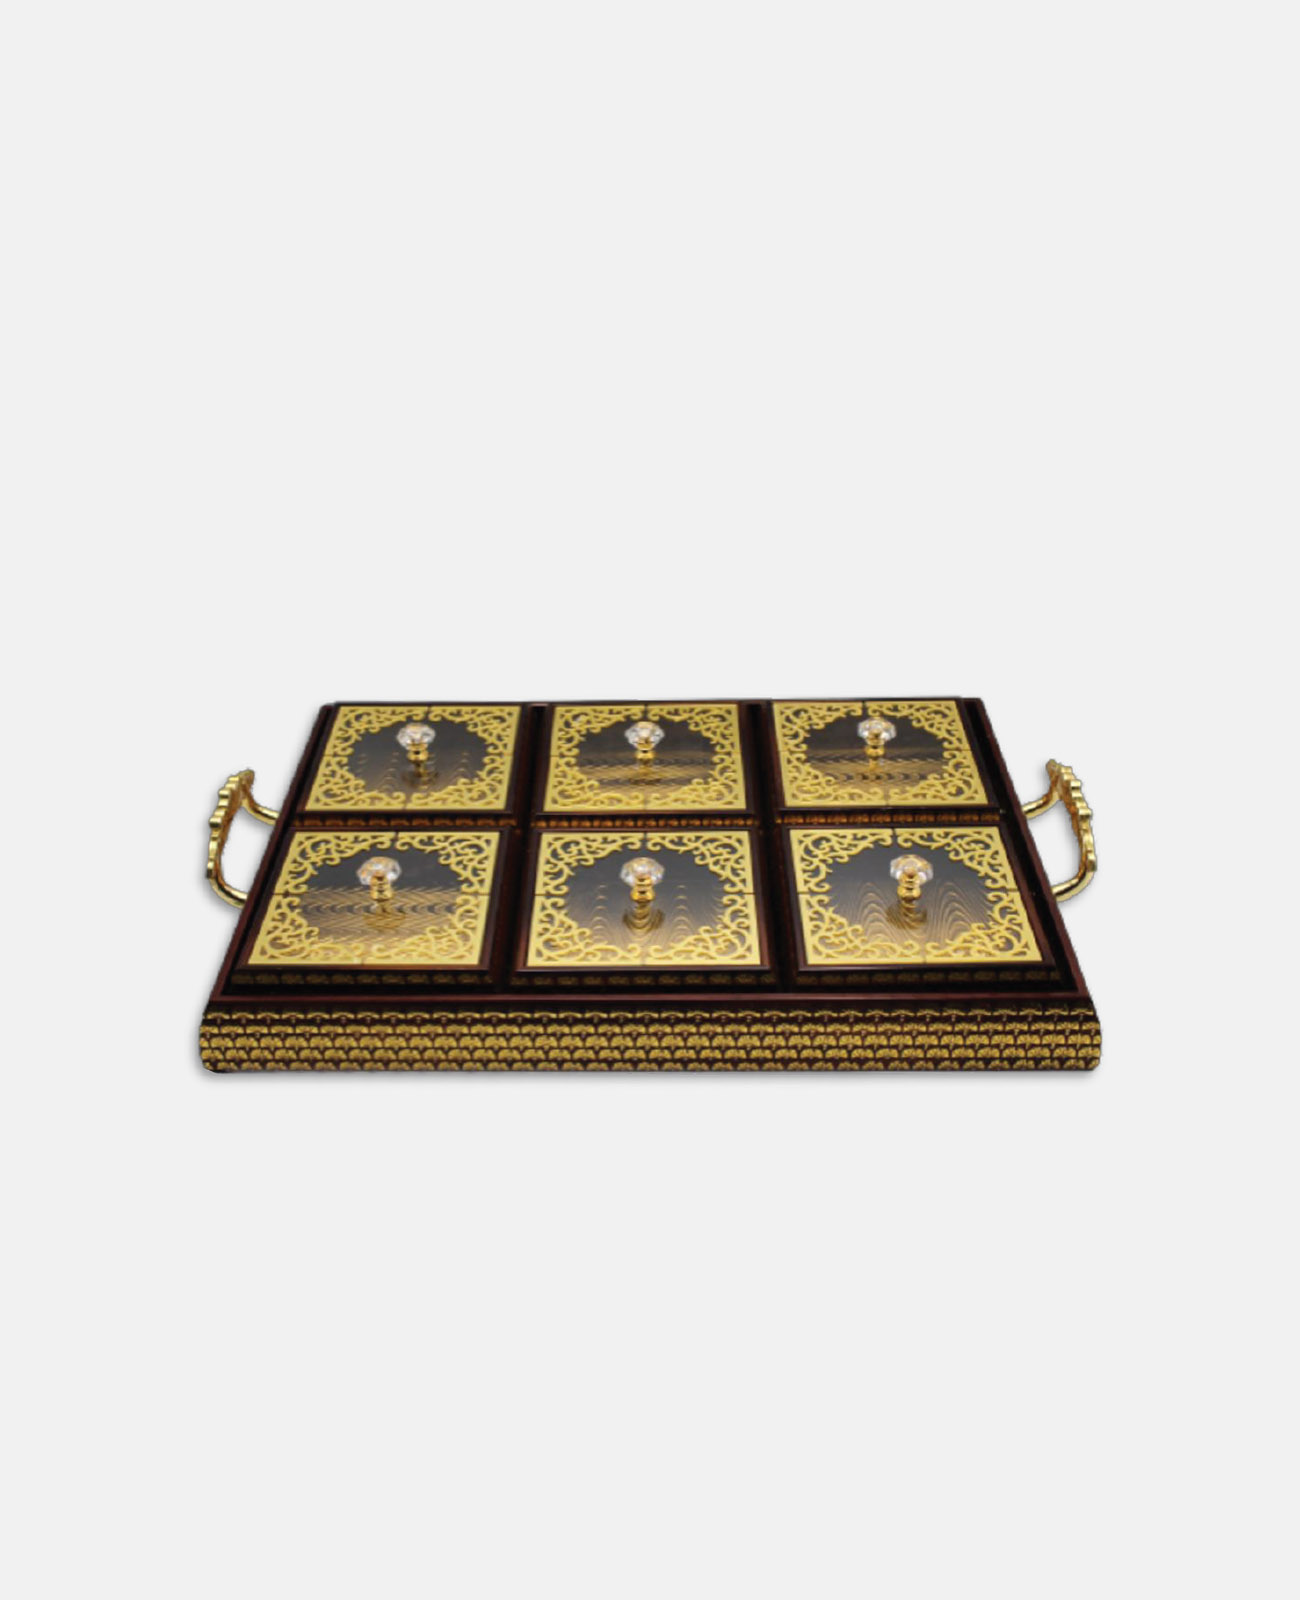 Black and Golden Fancy Wood Tray with 6 Wood Boxes/H 10-5